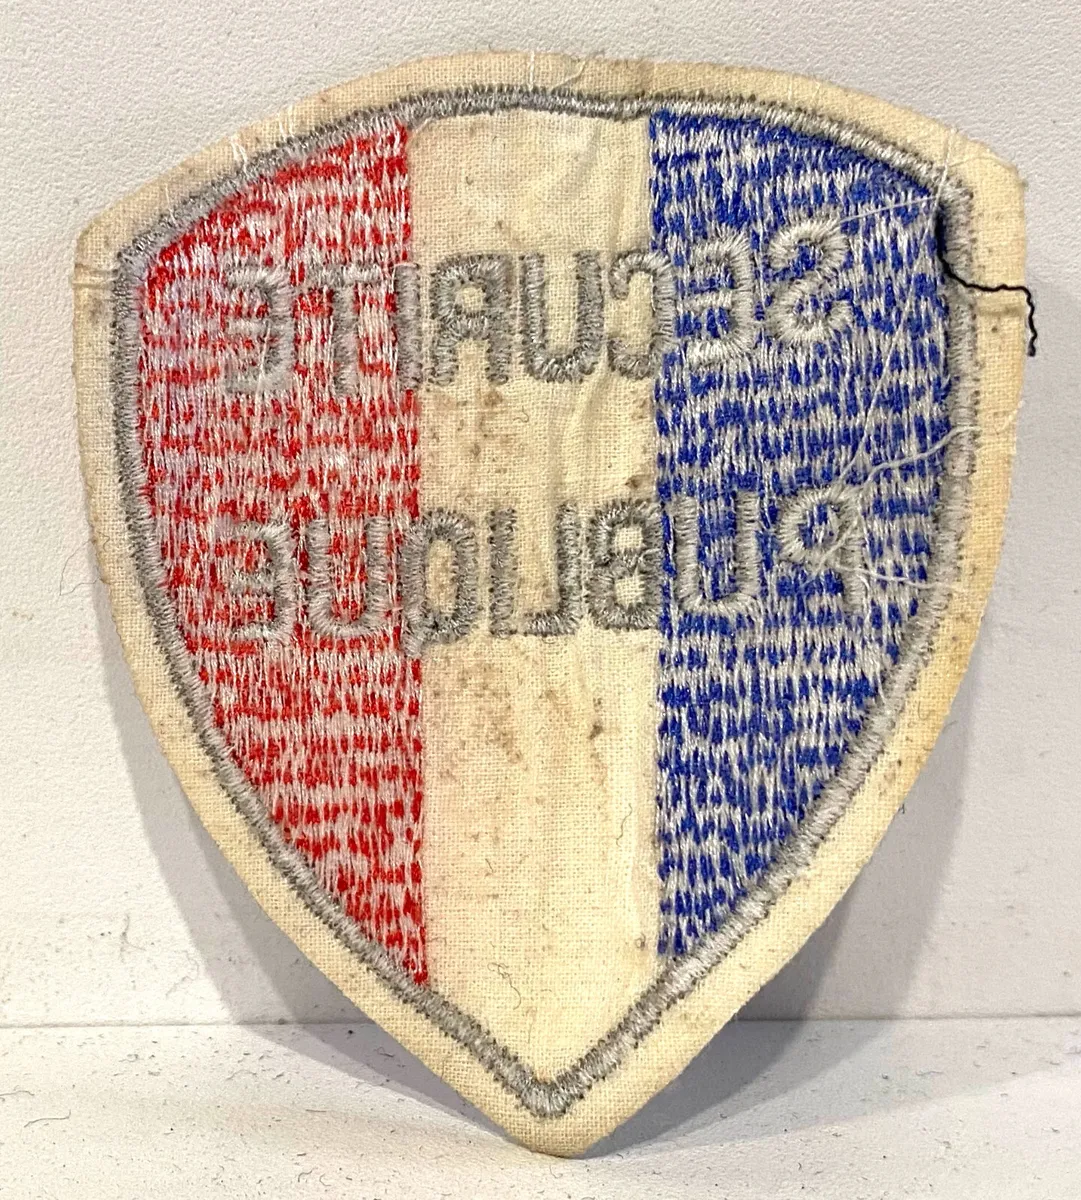 INSIGNE PATCH TISSU Police Nationale / Direction Generale